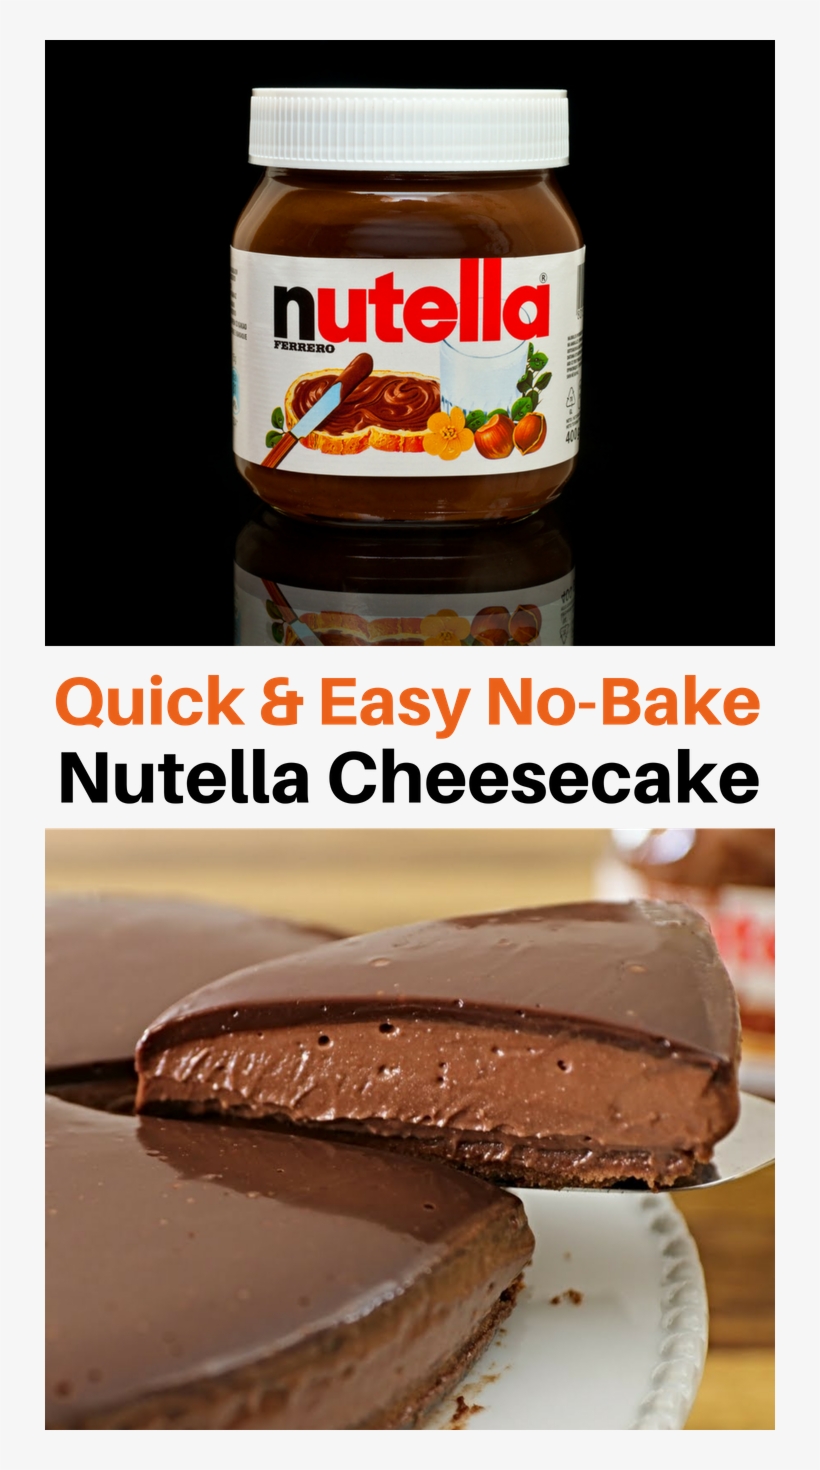 Nutella Hazelnut Spread With Cocoa, transparent png #5063809